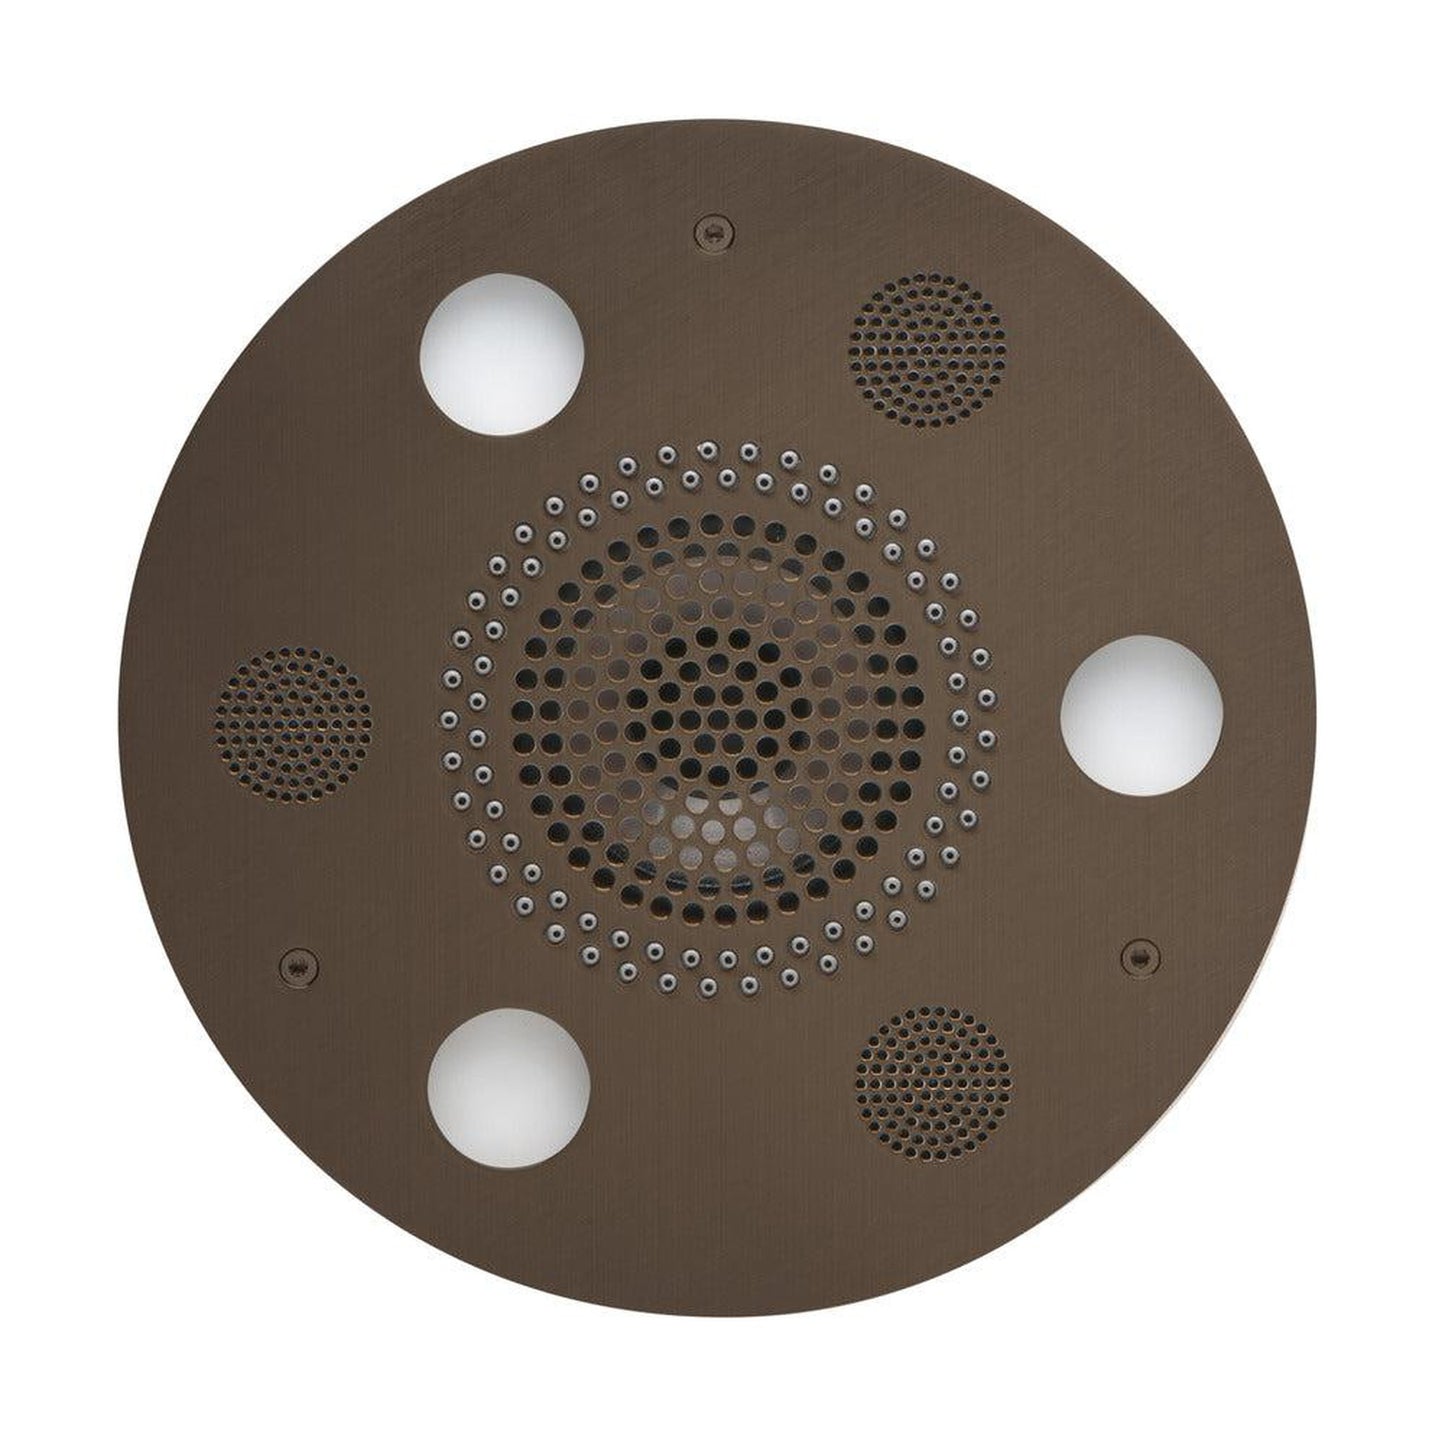 ThermaSol 10" Oil Rubbed Bronze Finish Round Serenity Advanced Light, Sound and Rain System